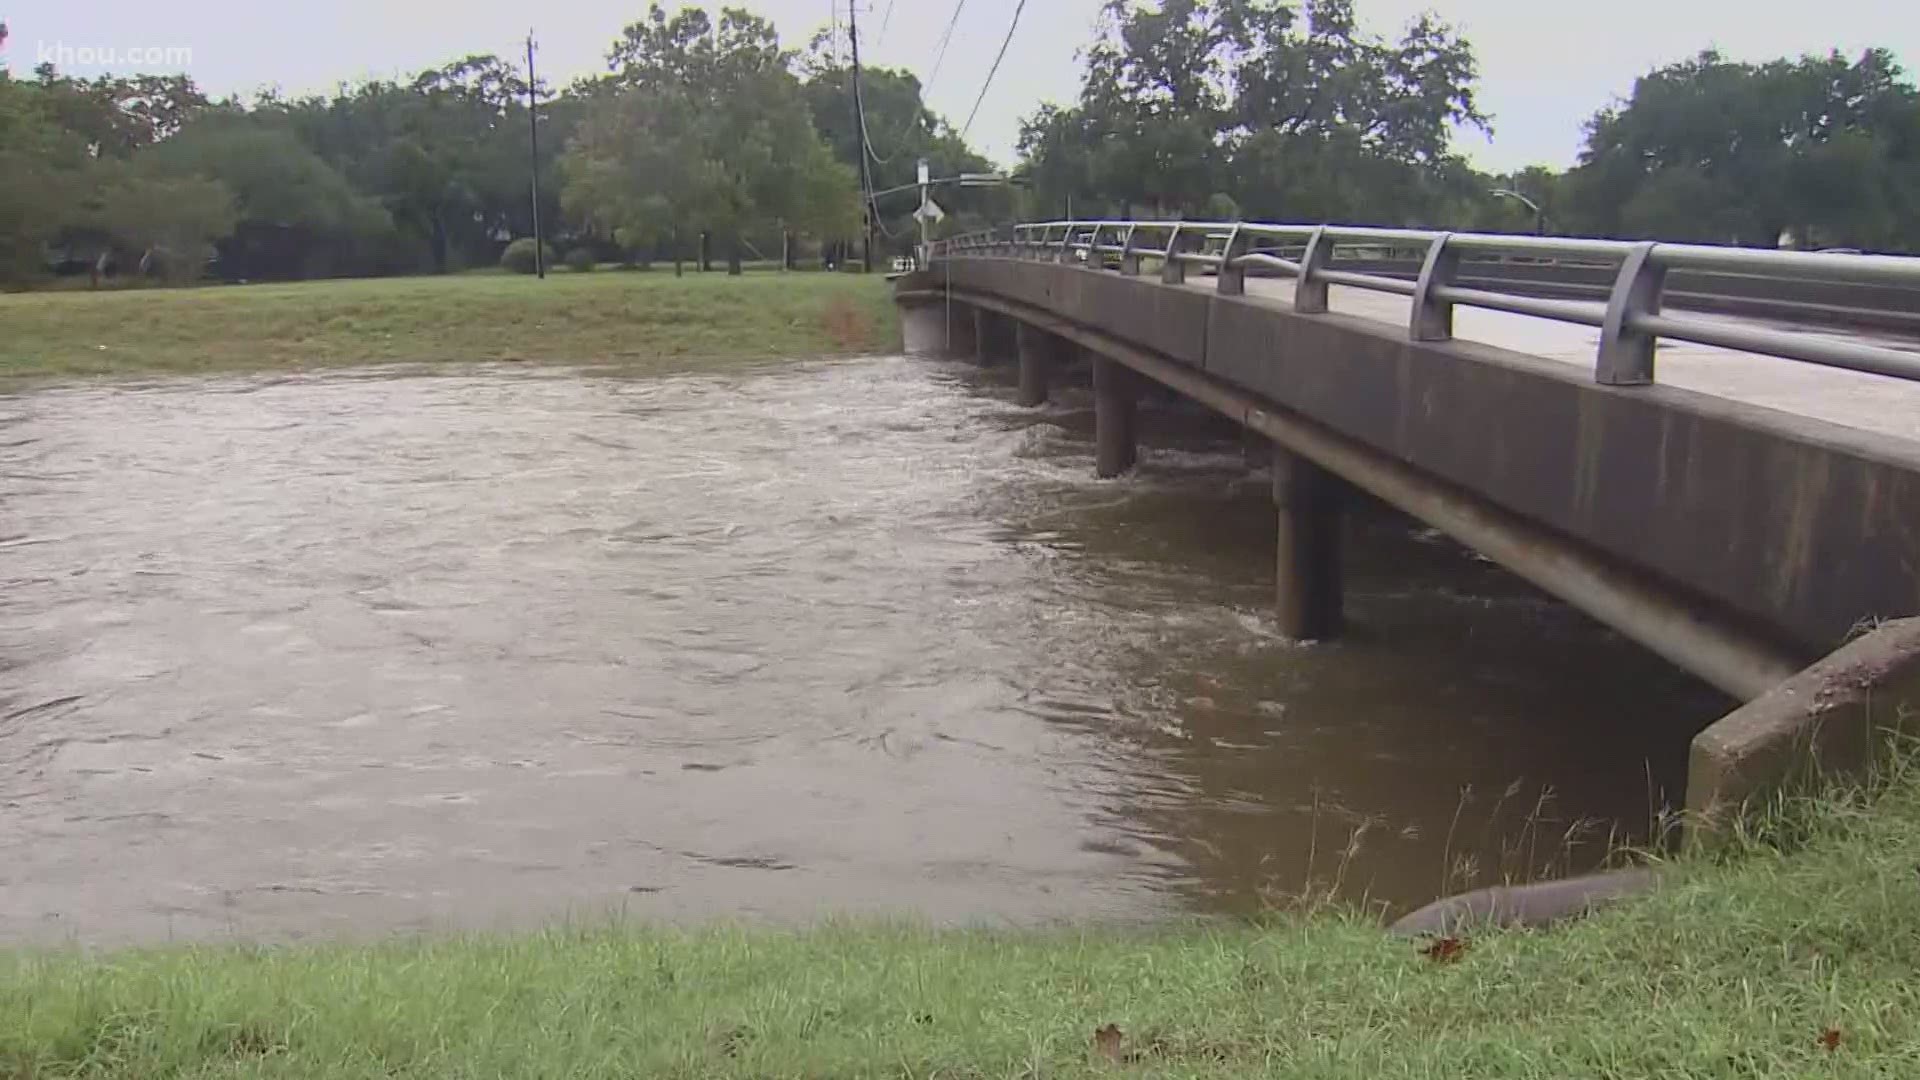 Some residents of the Meyerland area and county officials are crediting the widening of Brays Bayou and new bridges with helping keep the water down.